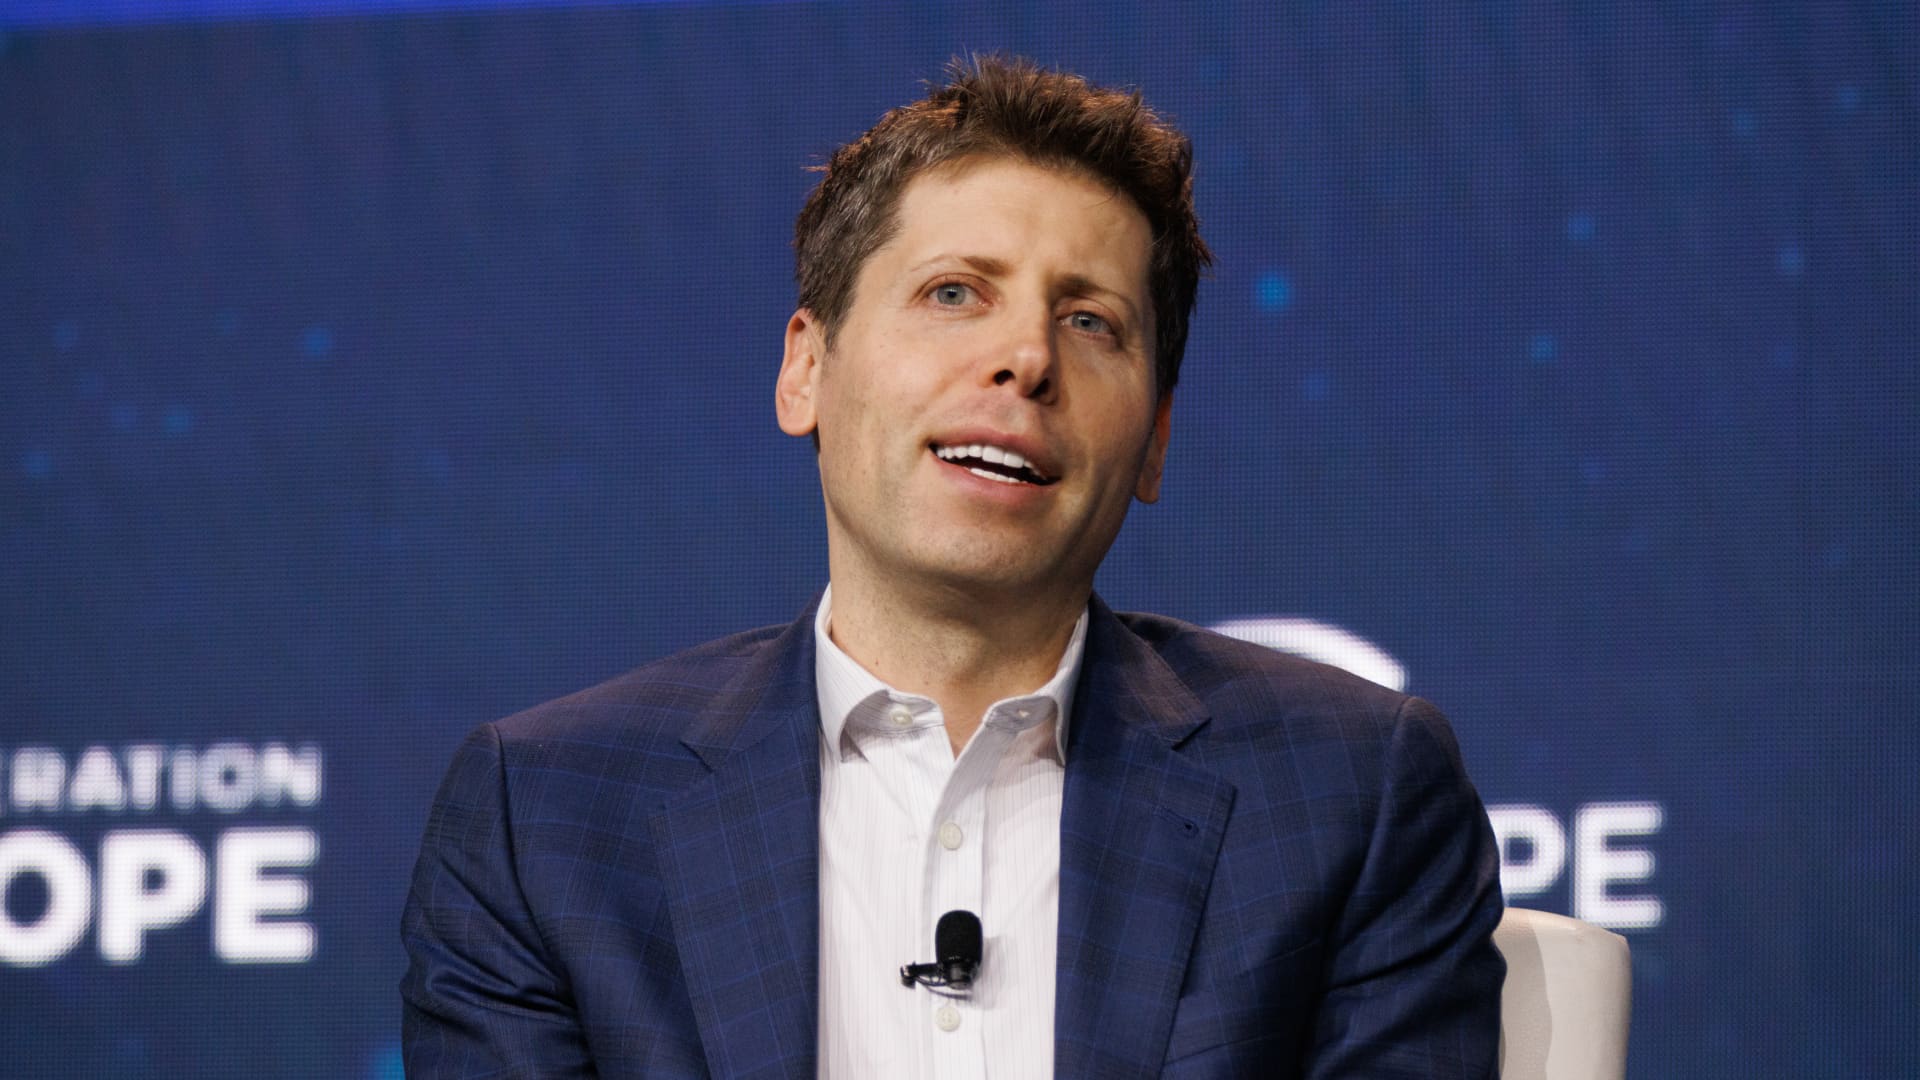 OpenAI CEO Sam Altman reportedly seeks trillions of dollars for AI chip project